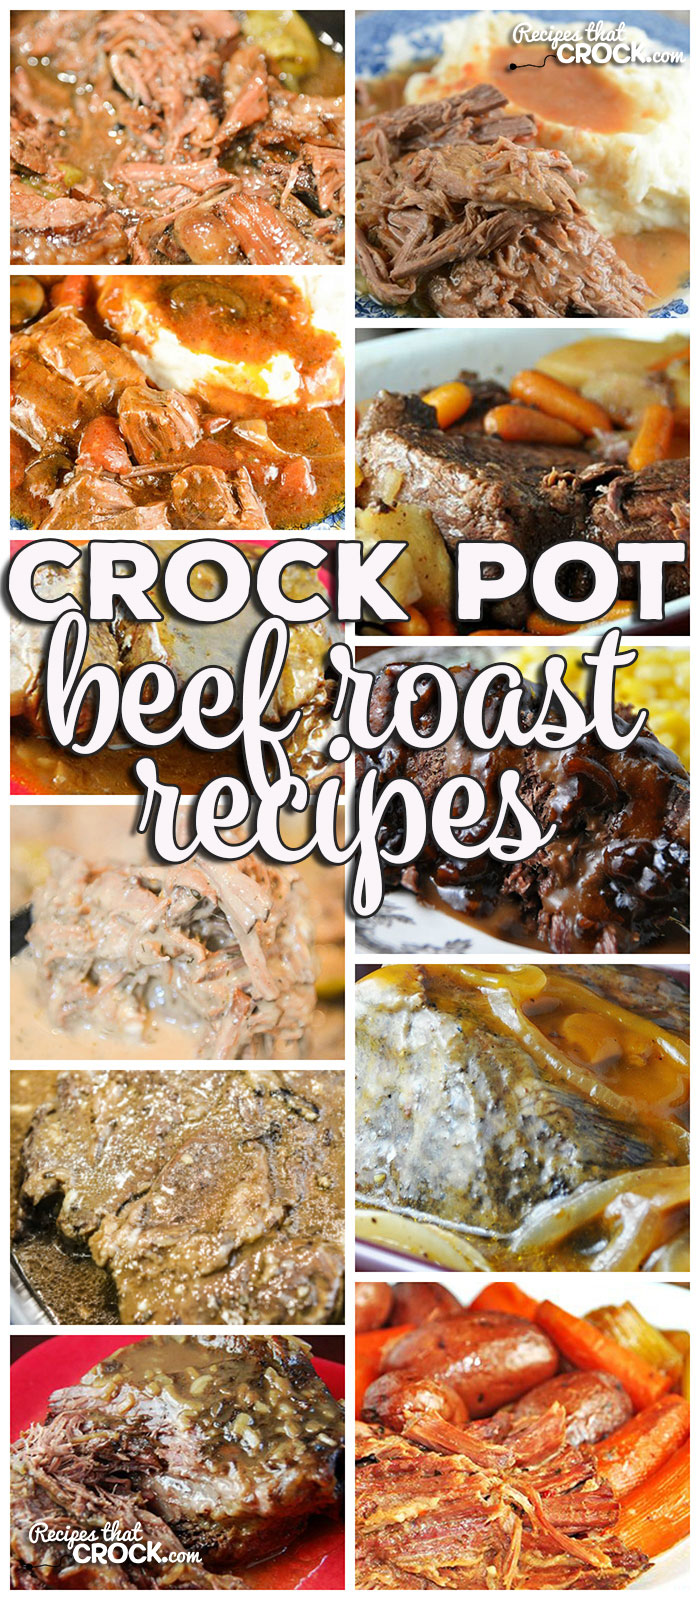 This week for our Friday Favorites we have Beef Roast Recipes like Crock Pot Mississippi Beef Roast, Crock Pot Roast with Gravy, Easy Crock Pot Roast, Golden Crock Pot Roast, Crock Pot Creamy Mississippi Beef, Crock Pot Italian Pot Roast, The Perfect Crock Pot Roast, Crock Pot Red Roast, Easy Crock Pot Beef French Dips, Crock Pot Easy Special Pot Roast, Savory Pot Roast and Slow Cooker Pot Roast.